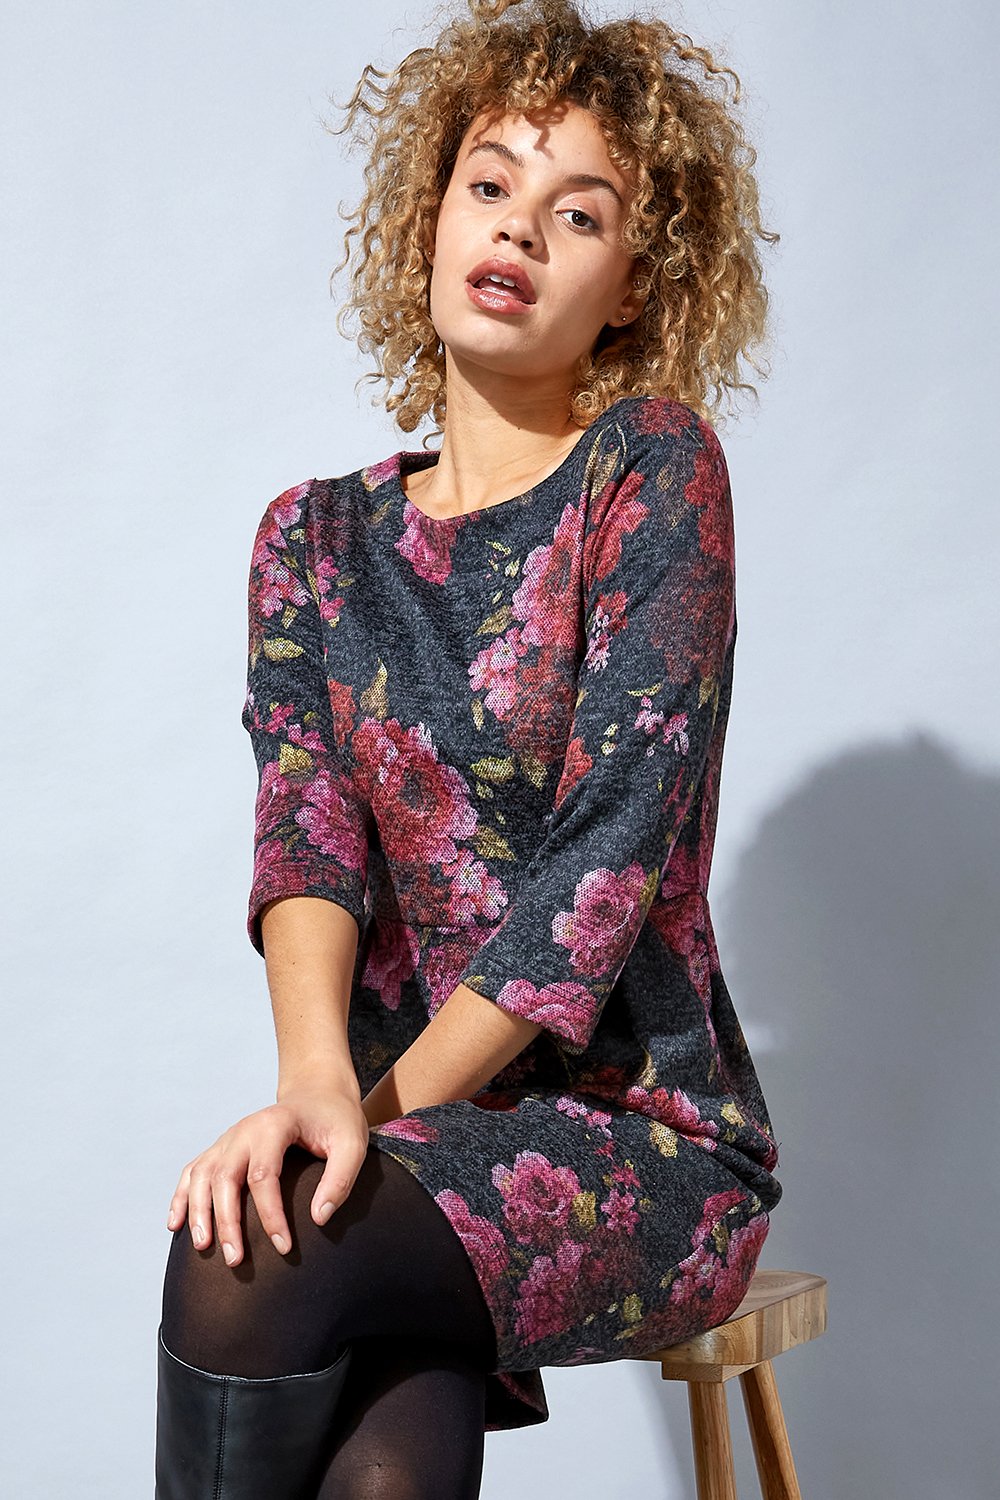 MAGENTA Wooly Touch Floral Print Shift Dress, Image 4 of 5